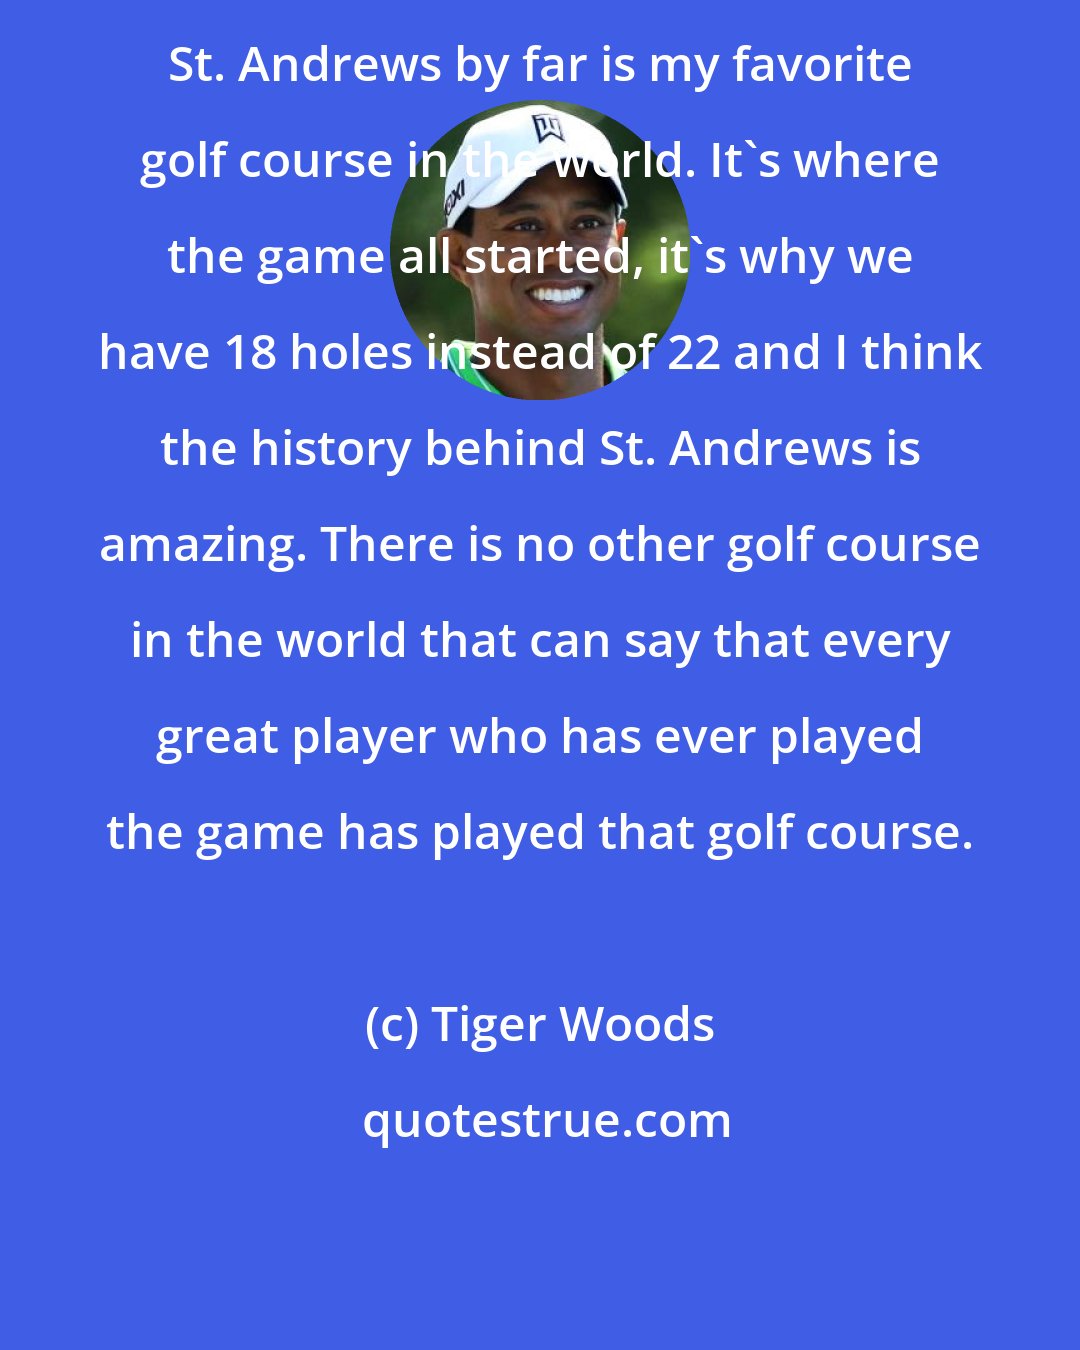 Tiger Woods: St. Andrews by far is my favorite golf course in the world. It's where the game all started, it's why we have 18 holes instead of 22 and I think the history behind St. Andrews is amazing. There is no other golf course in the world that can say that every great player who has ever played the game has played that golf course.